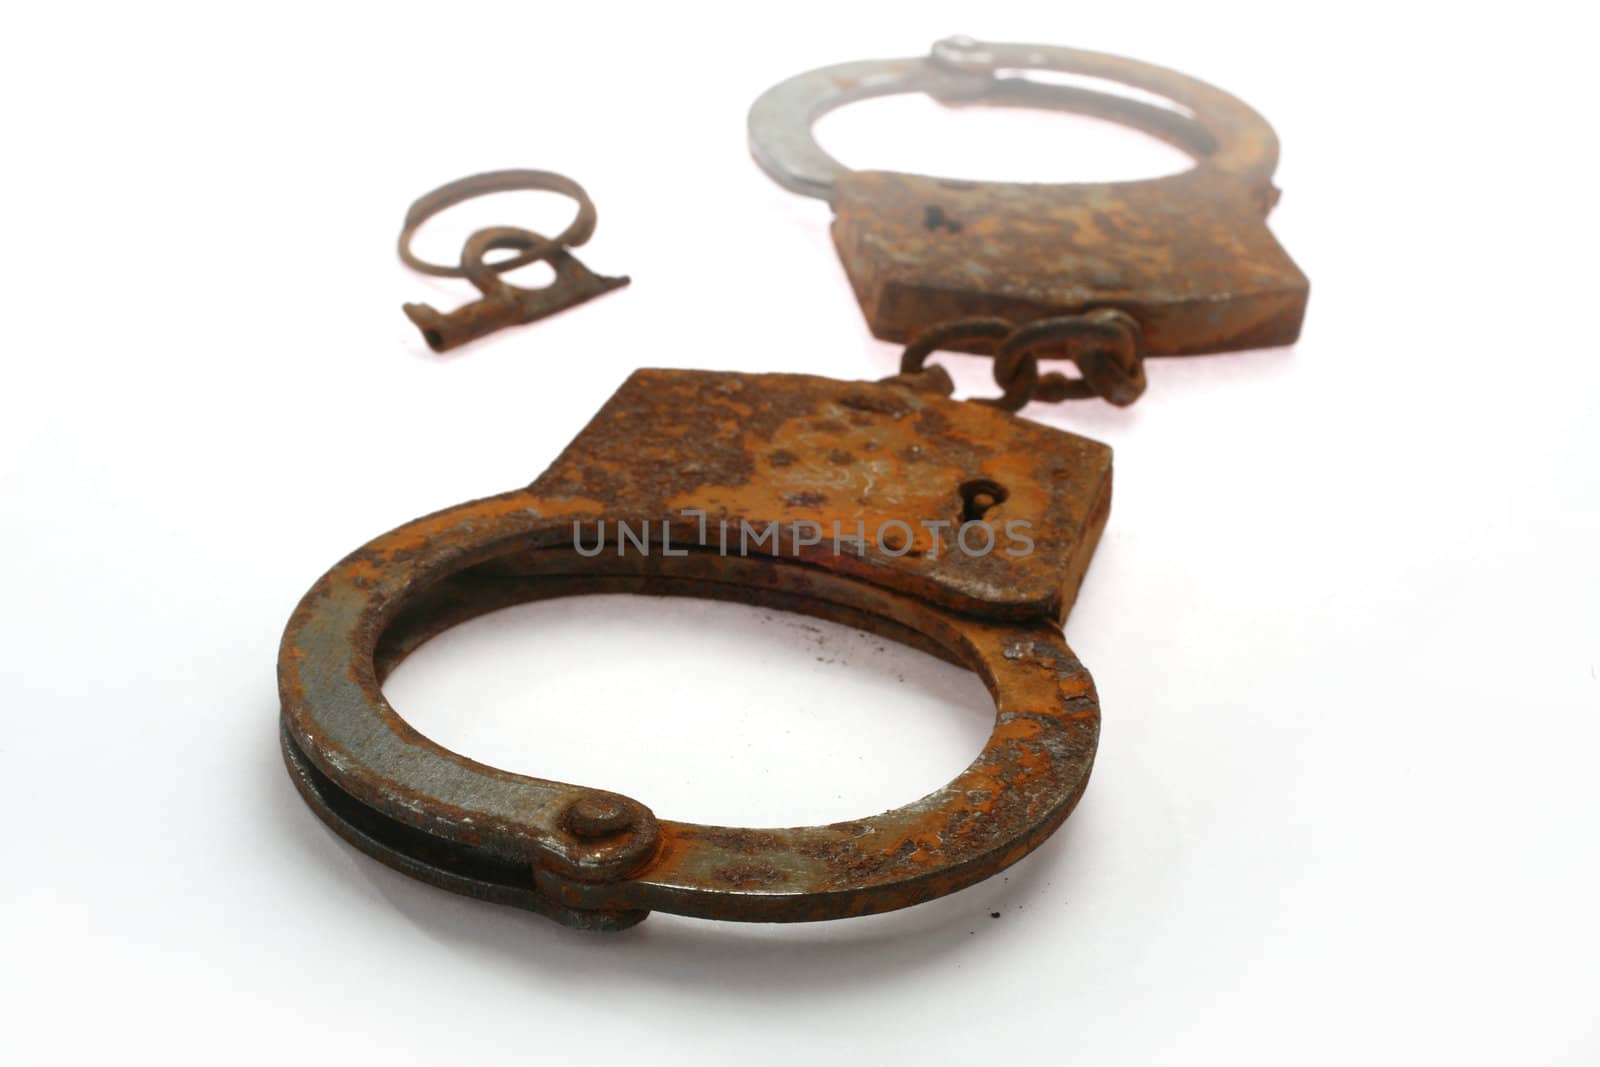 old rusty handcuffs on a white background